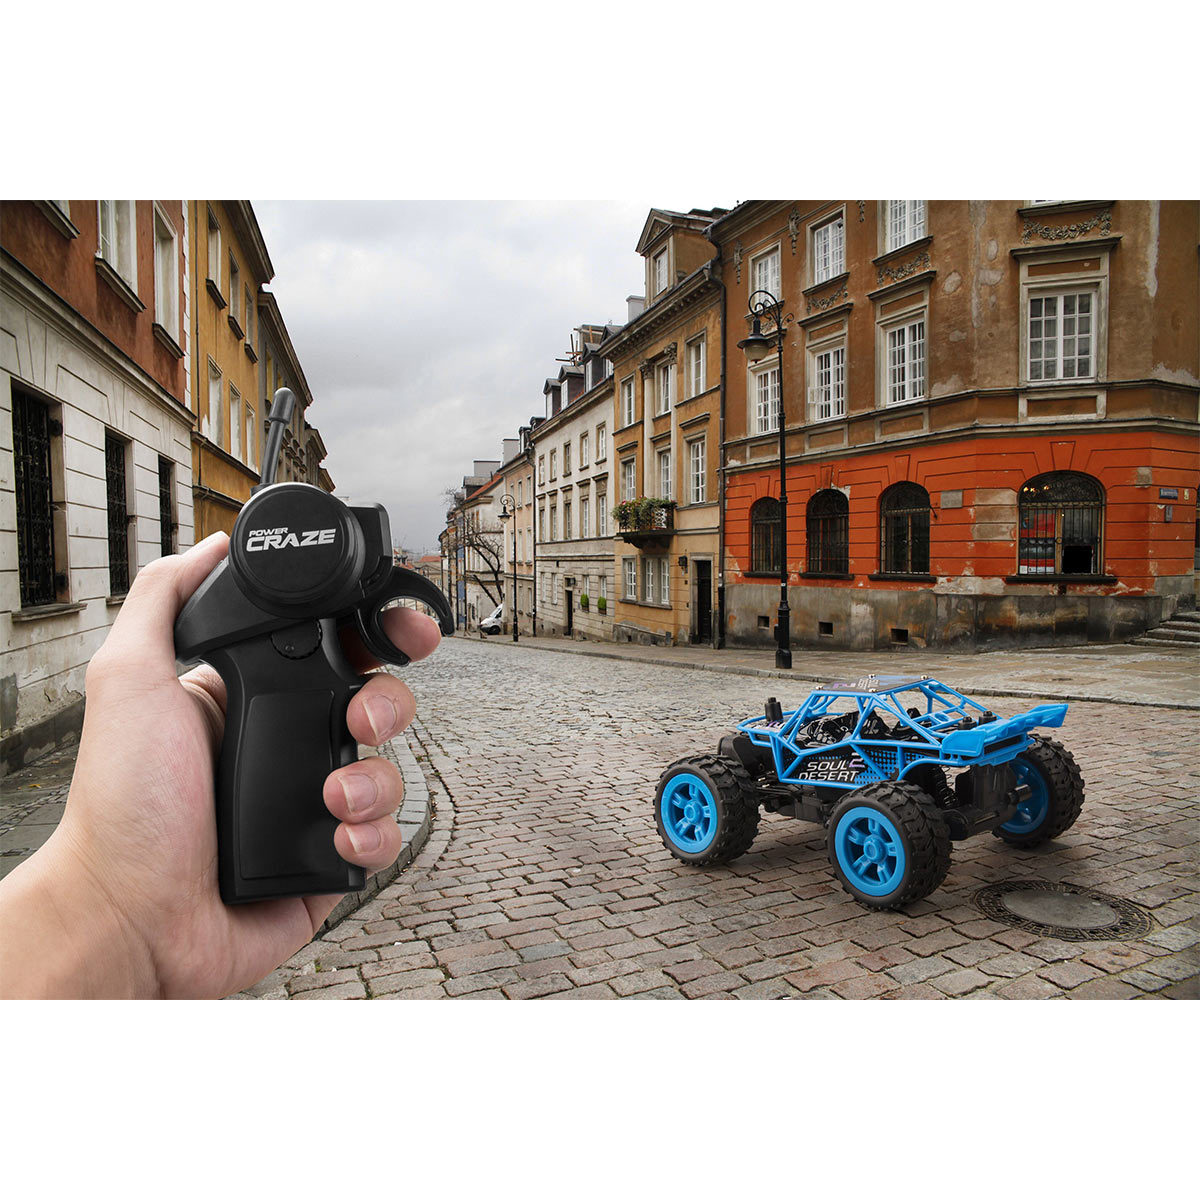 Propel power craze rc car in blue lifestyle image